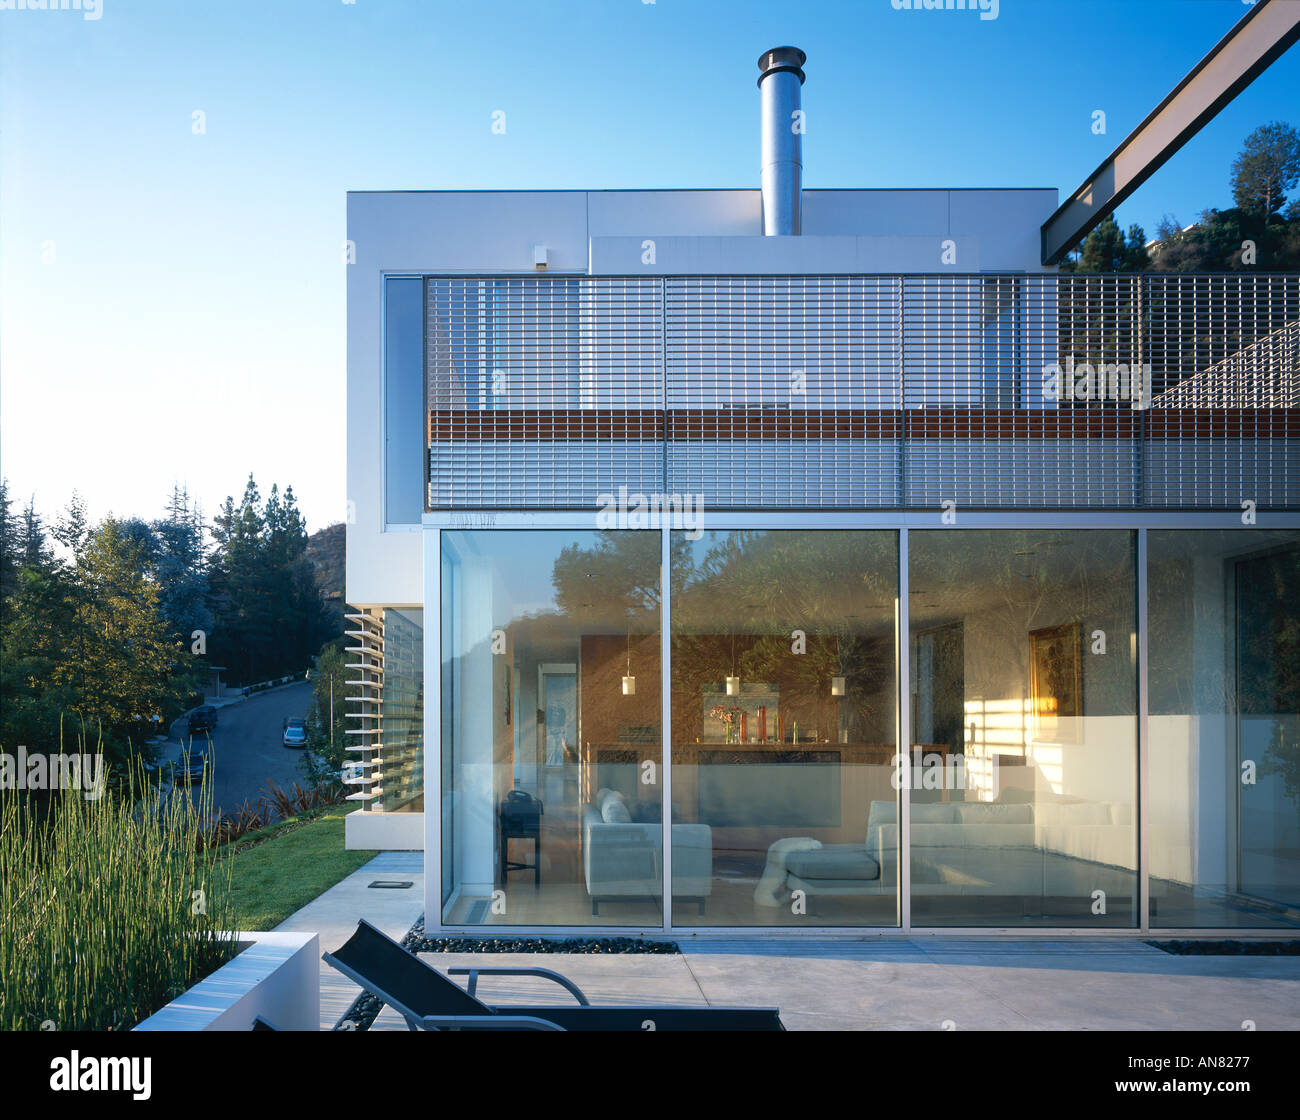 Oshry Residence, Bel Air, California. Exterior with living space through glass wall. Architect: SPF Architects Stock Photo